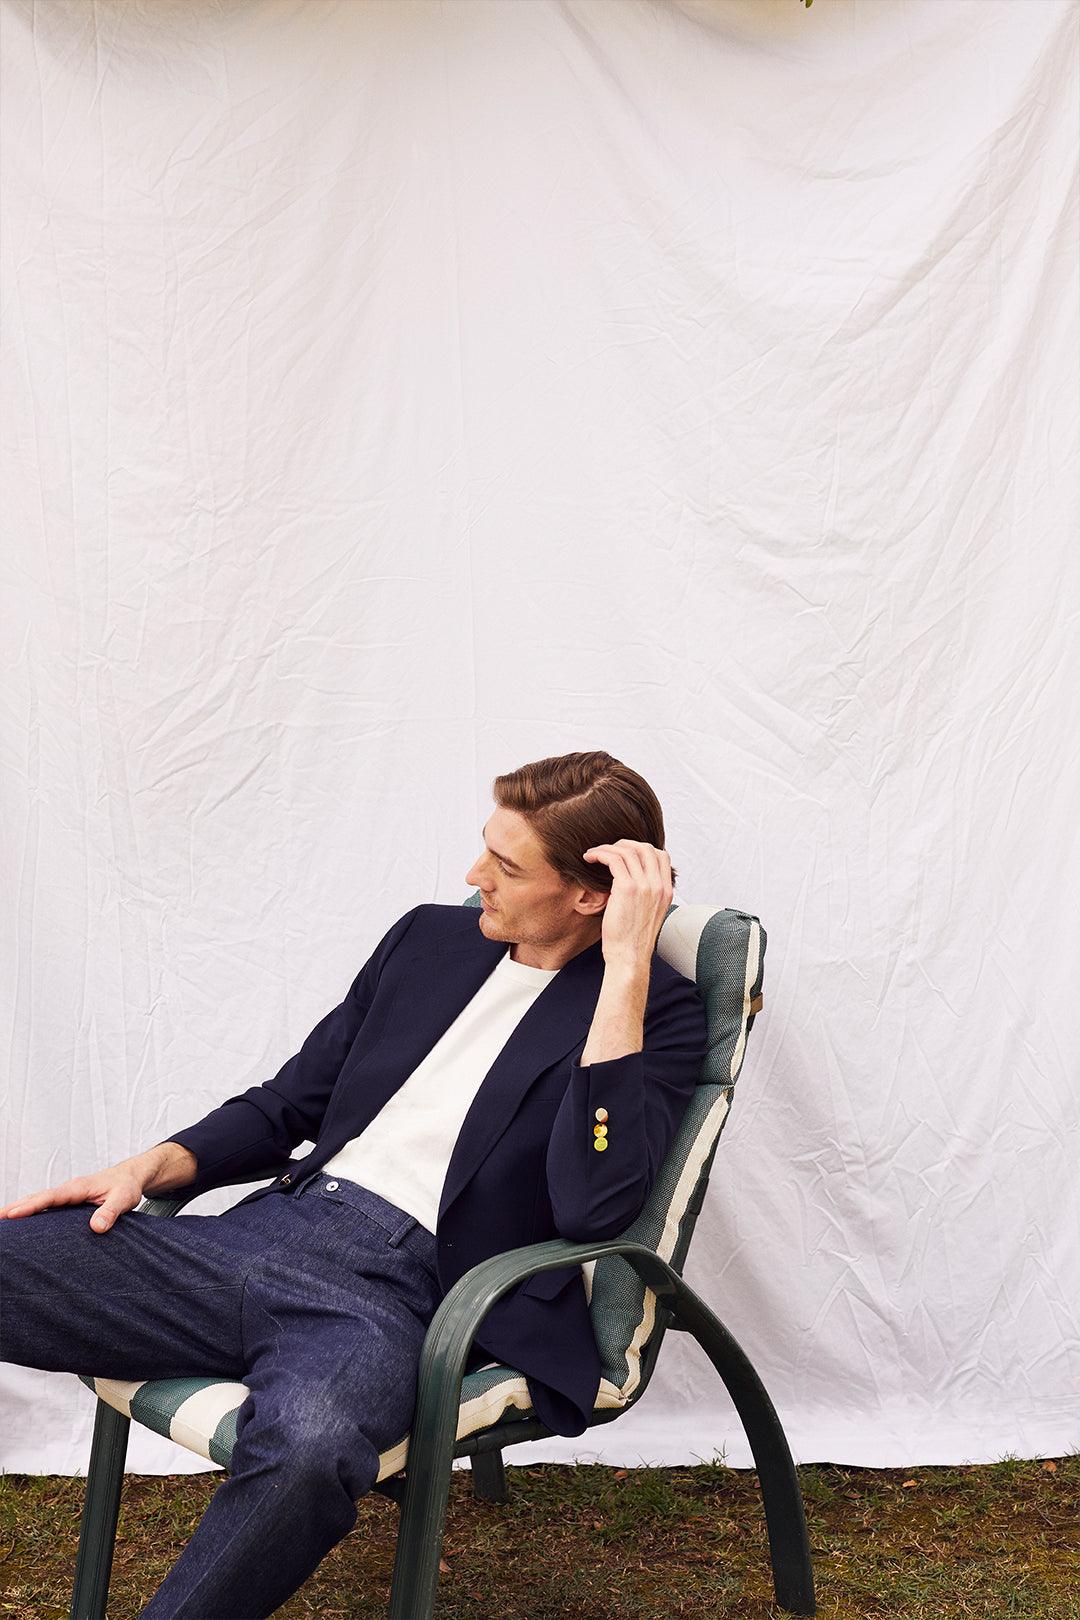 Navy Mock Lino Single Breasted Jacket and Navy Twill Flat Front Frogmouth Trouser - Oscar Hunt